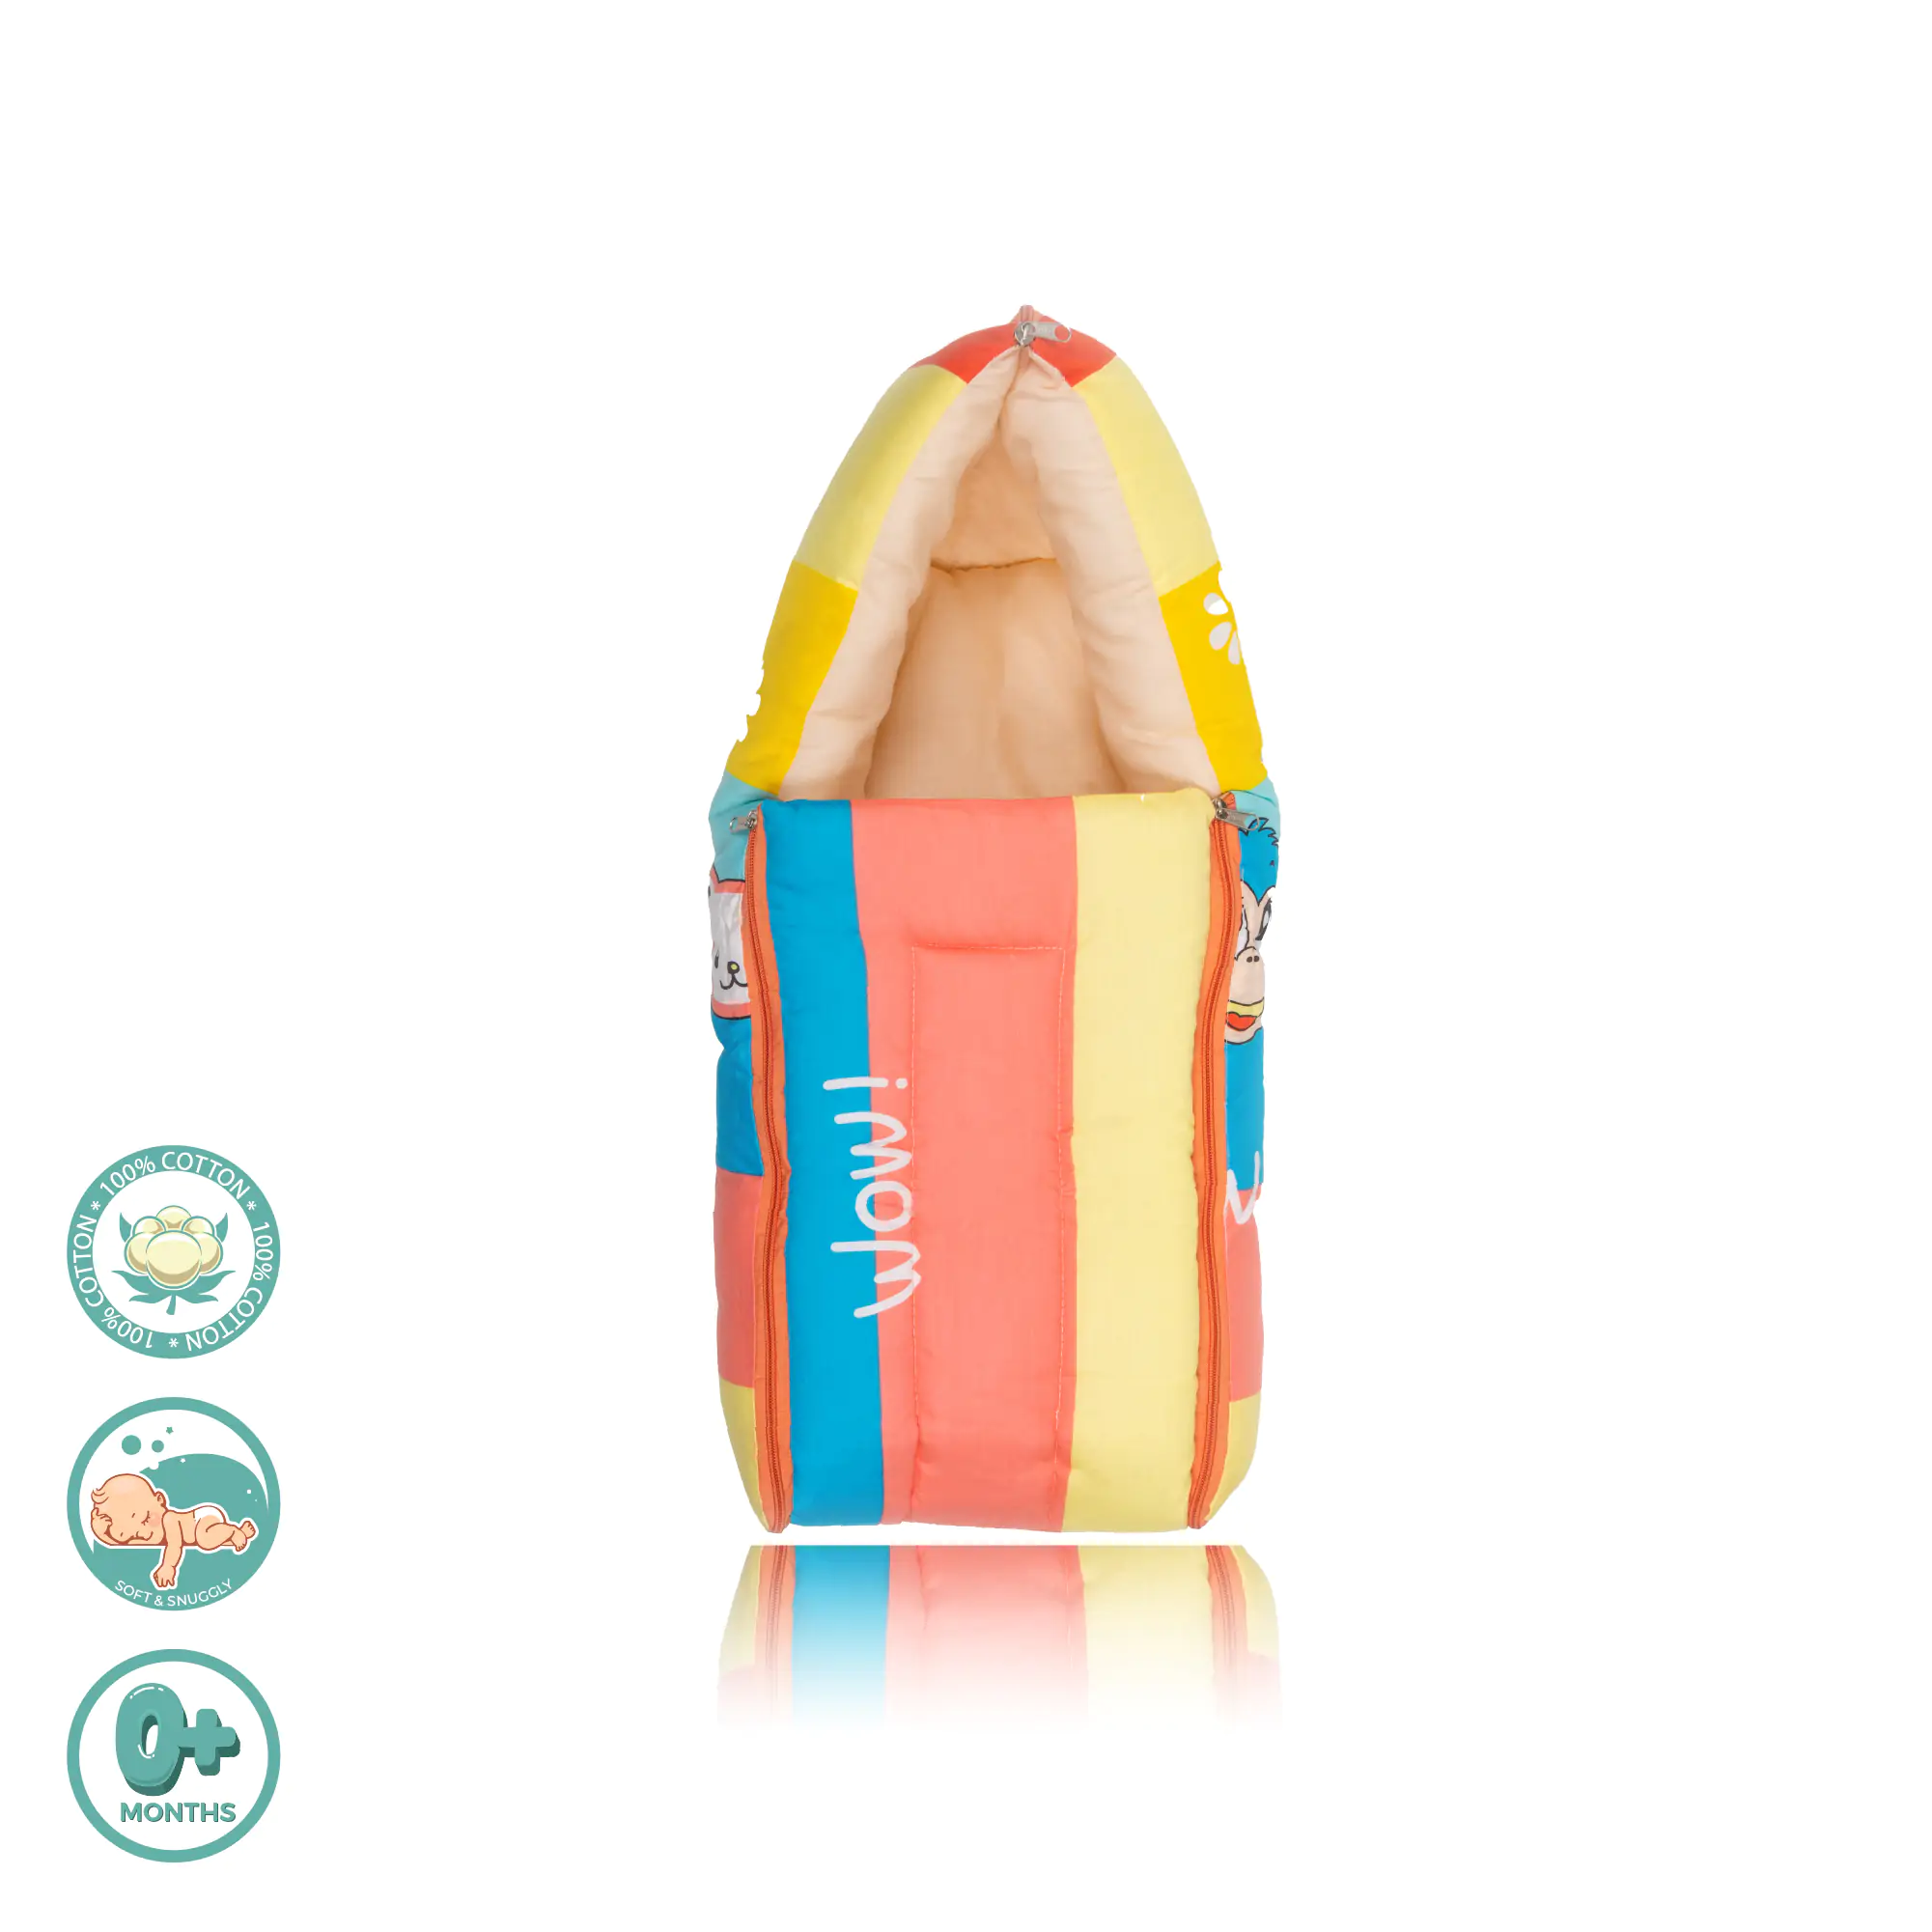 Mylo 4–in-1 Soft & Snuggly Baby Sleeping Bag/ Carry Nest with 3-way Zip Opening- Magical Rainbow  